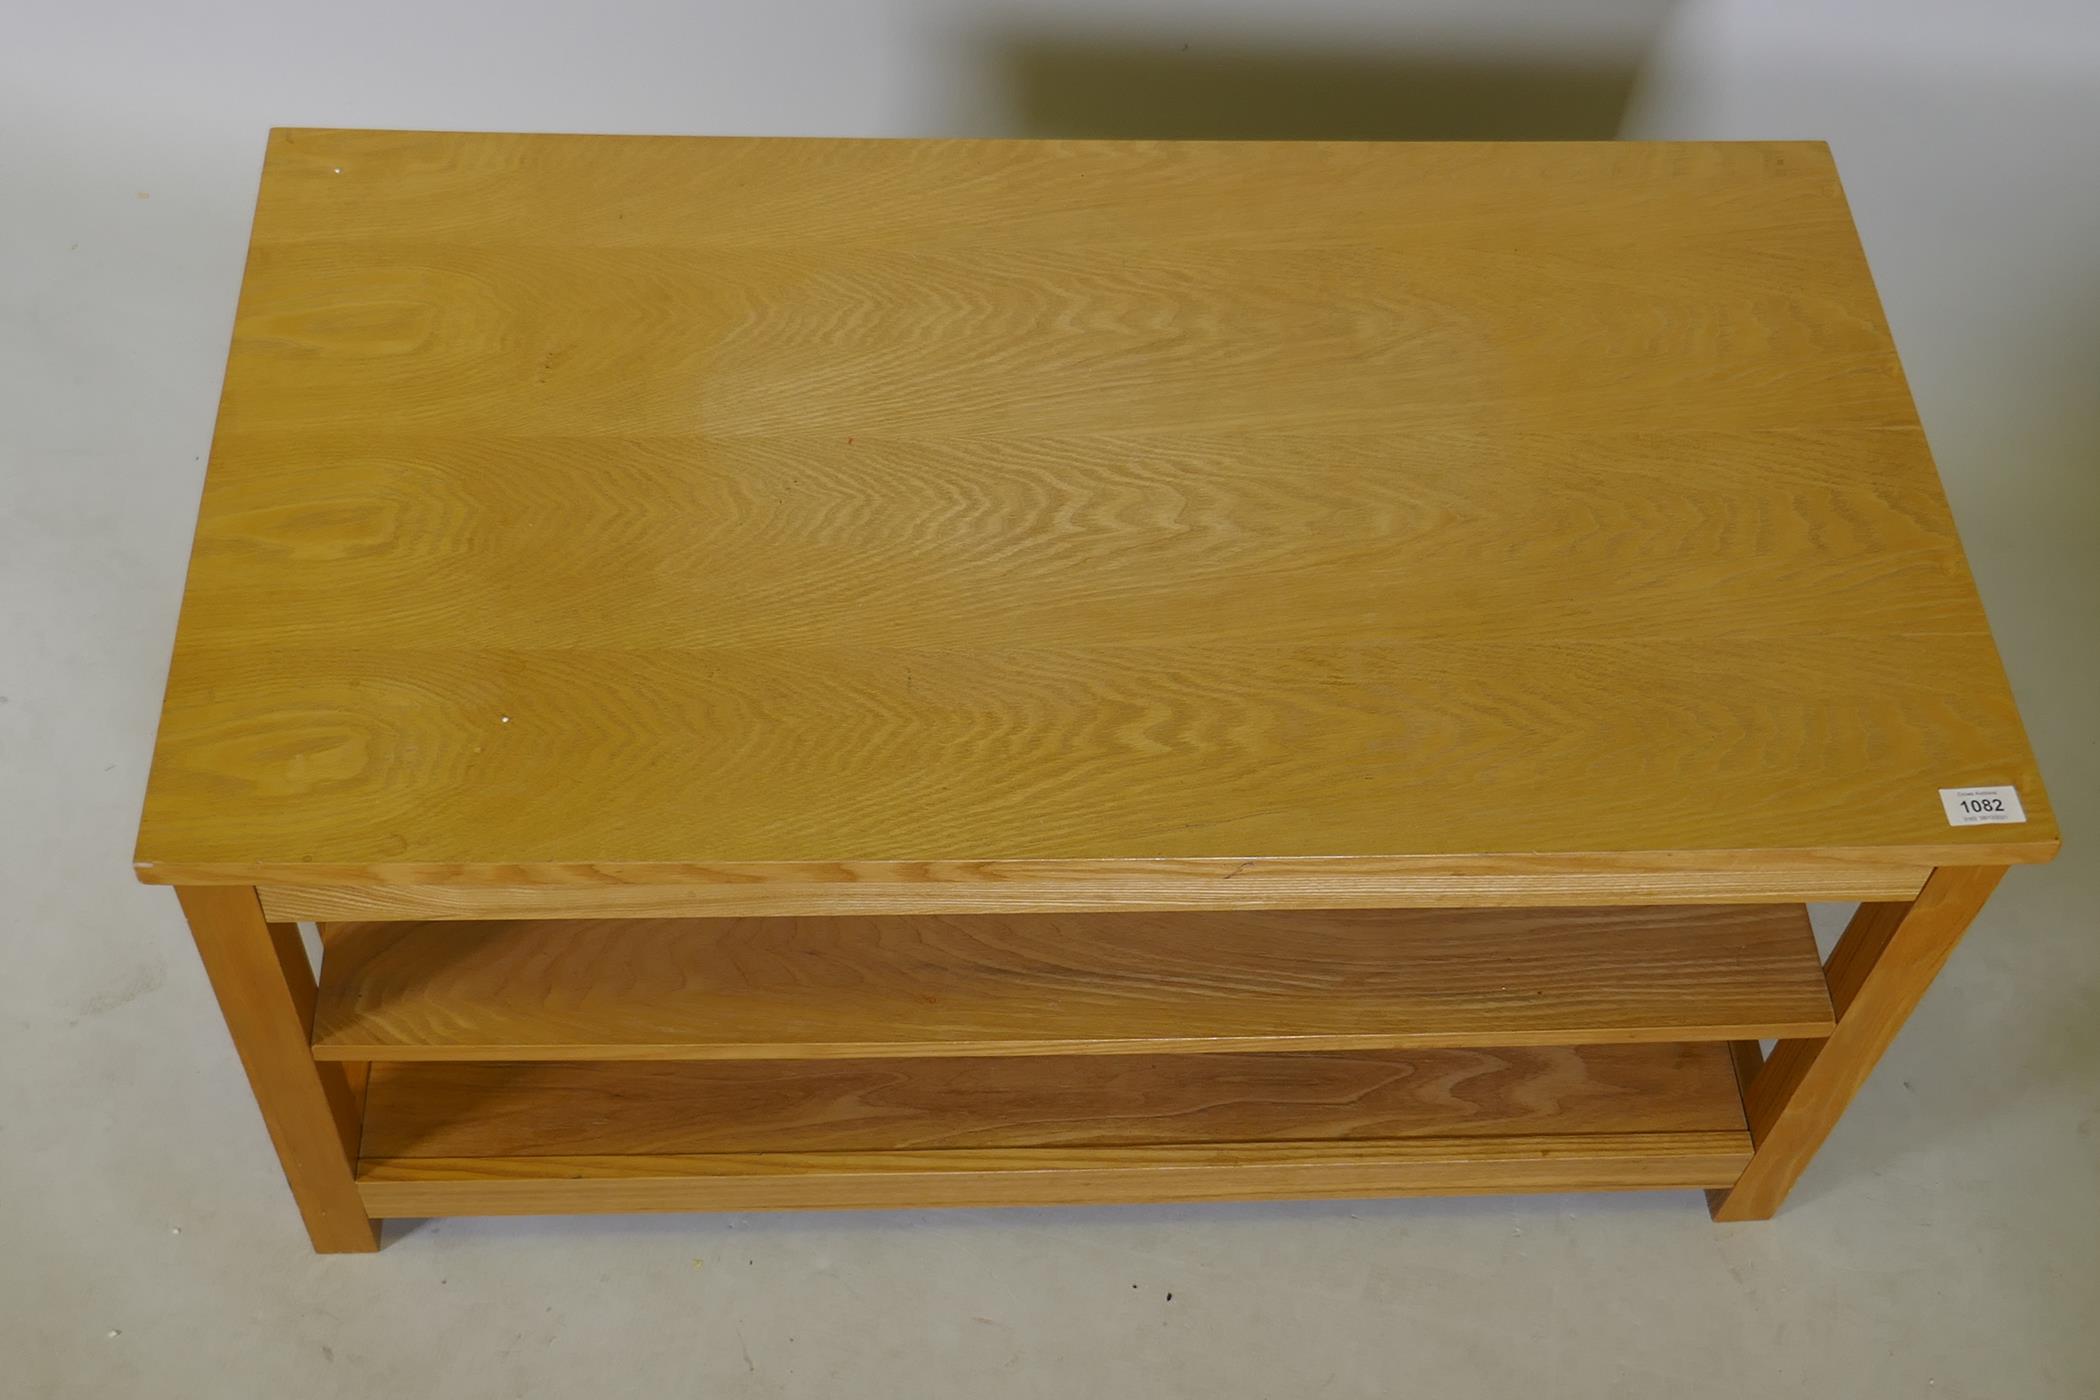 A contemporary light oak three tier coffee table with slatted ends, 20" x 36" x 18" - Image 2 of 2